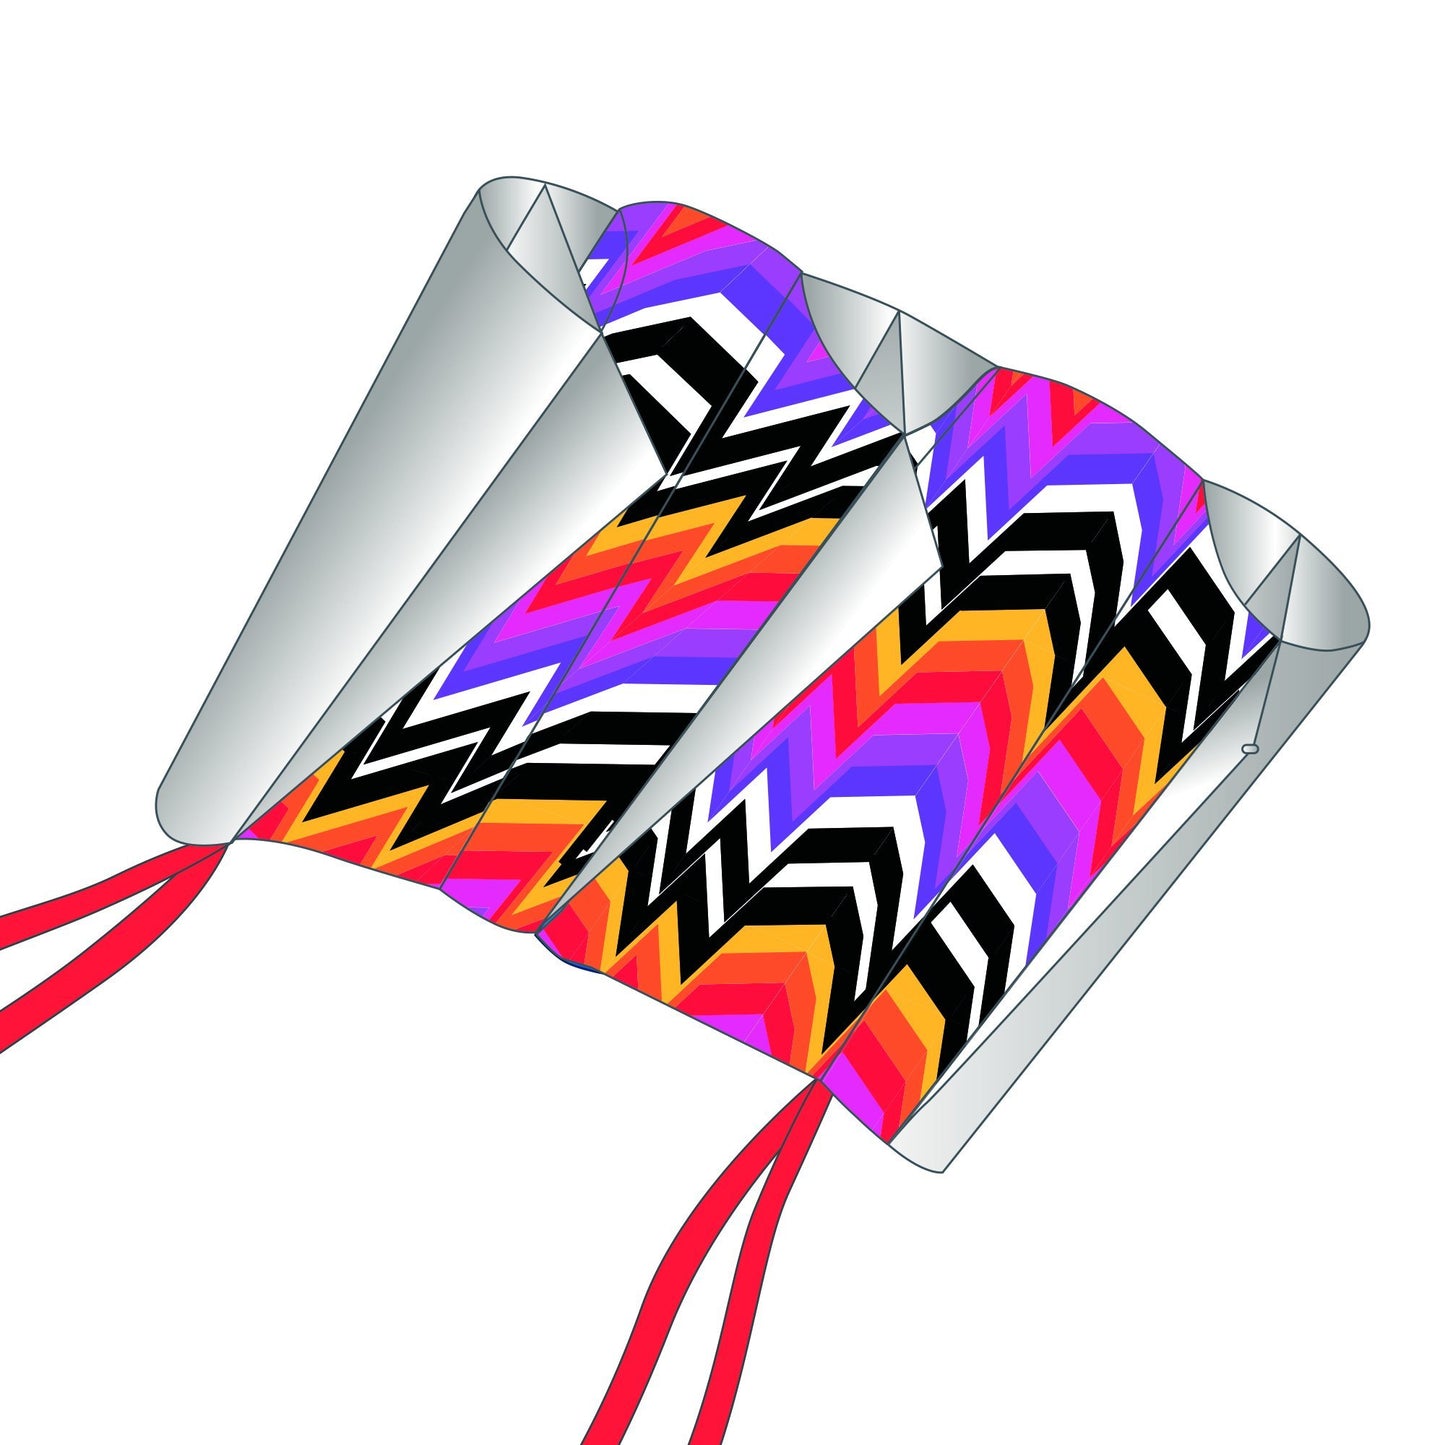 X Kites SkyFoil ZigZag + Pocket Kite Isometric Parafoil Kite Bundle - No Assembly Required Product Image